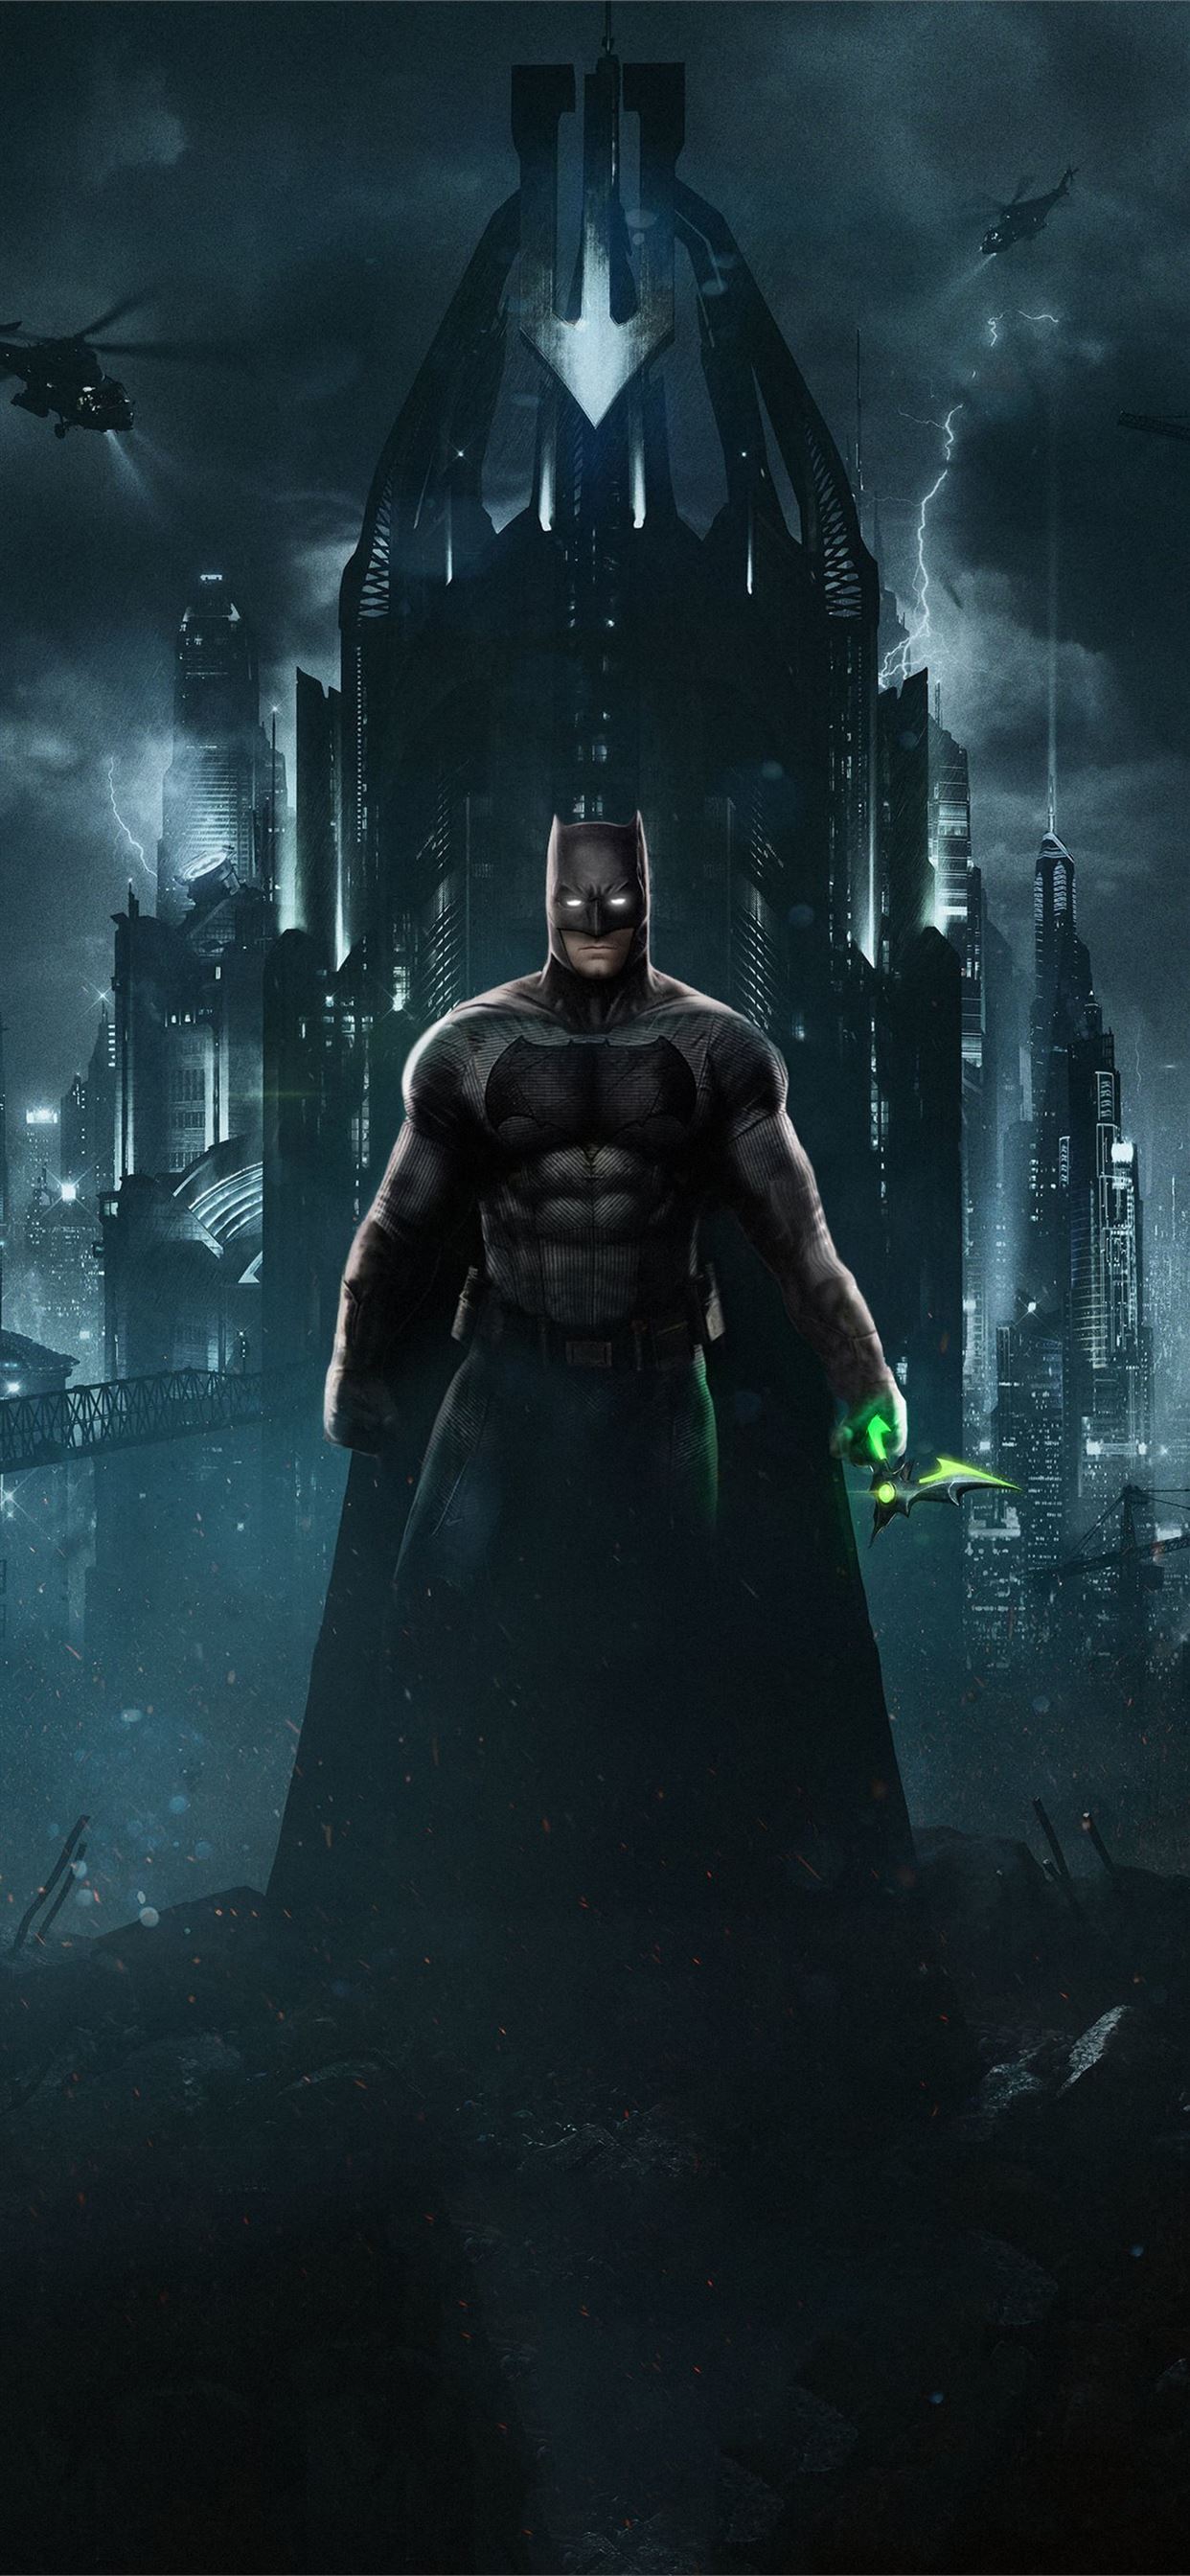 DCEU Batman In Injustice 2 Samsung Galaxy Note 9 8... iPhone Wallpapers  Free Download